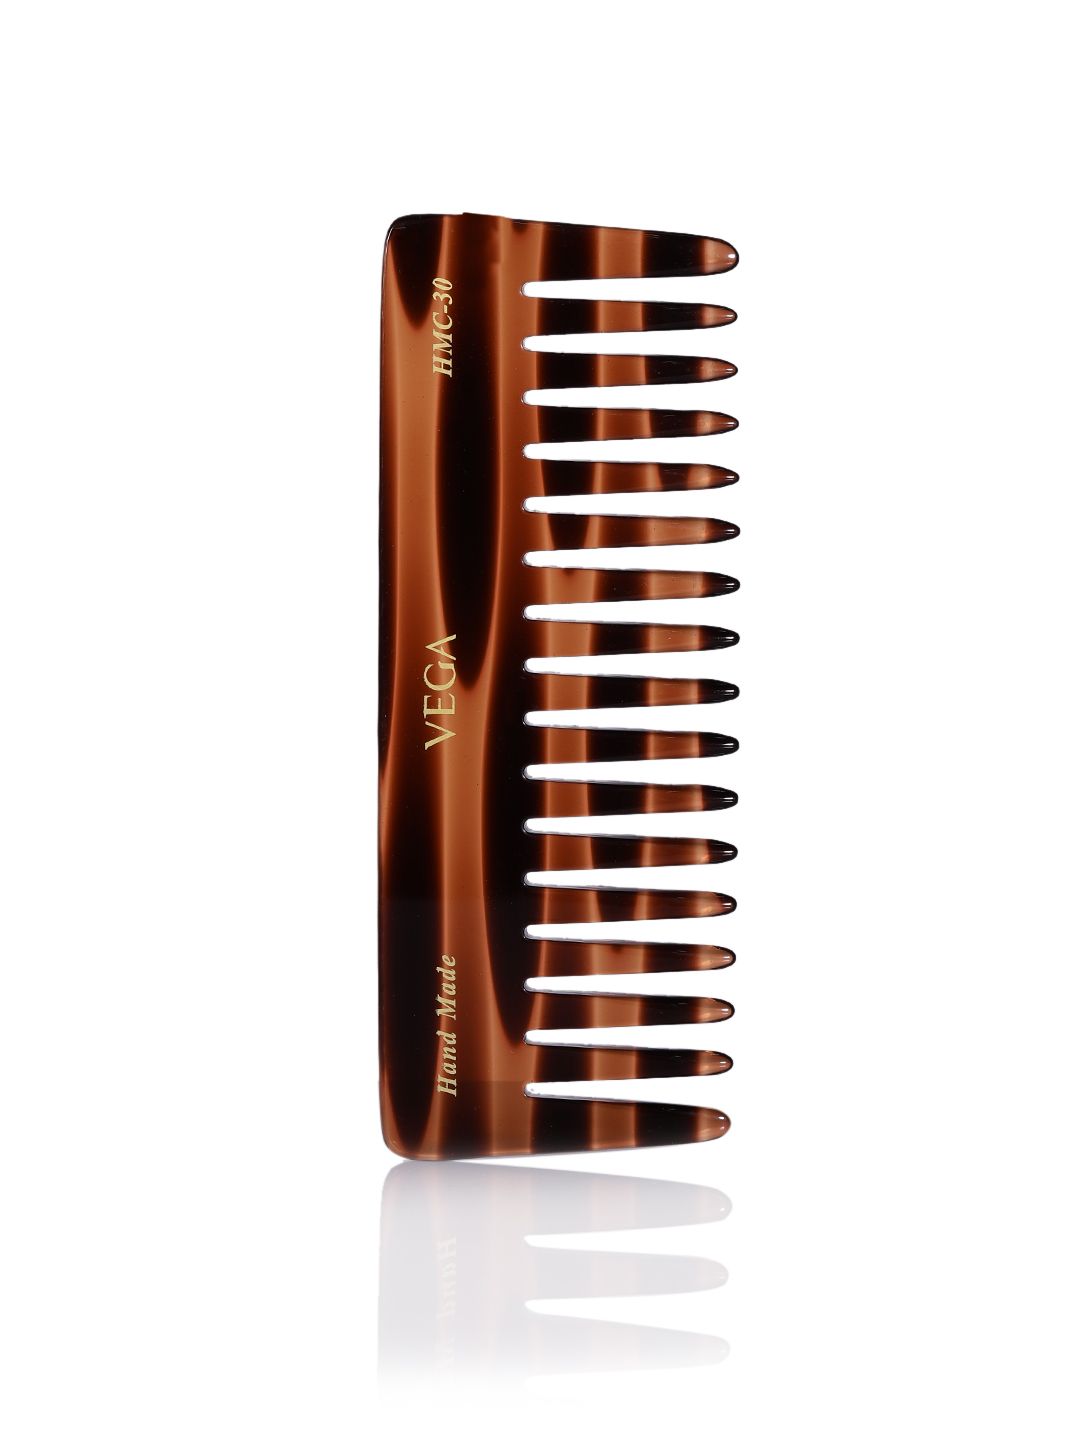 VEGA Unisex Brown Handcrafted Large Shampoo Comb Price in India